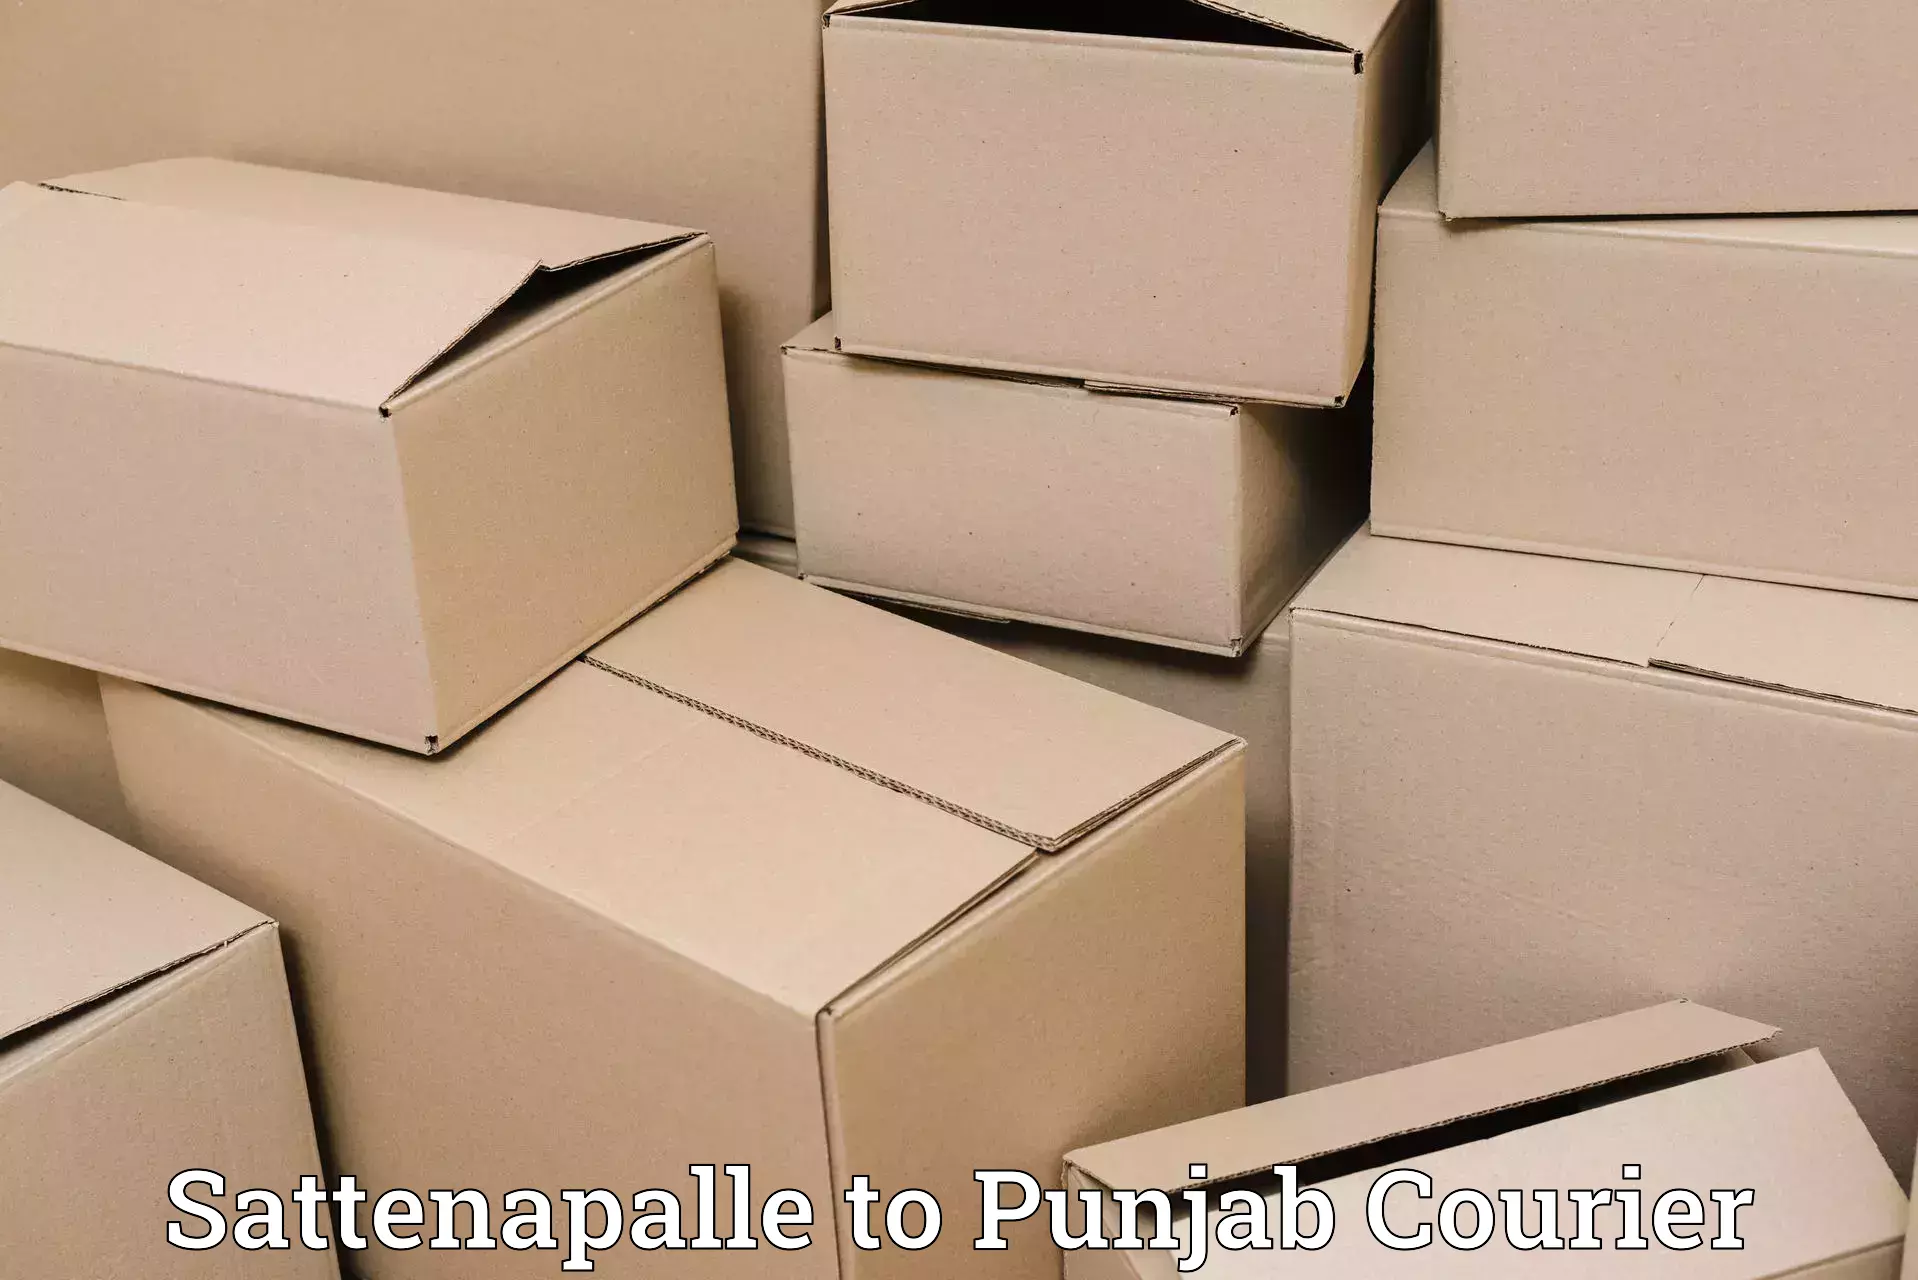 Luggage delivery estimate Sattenapalle to Punjab